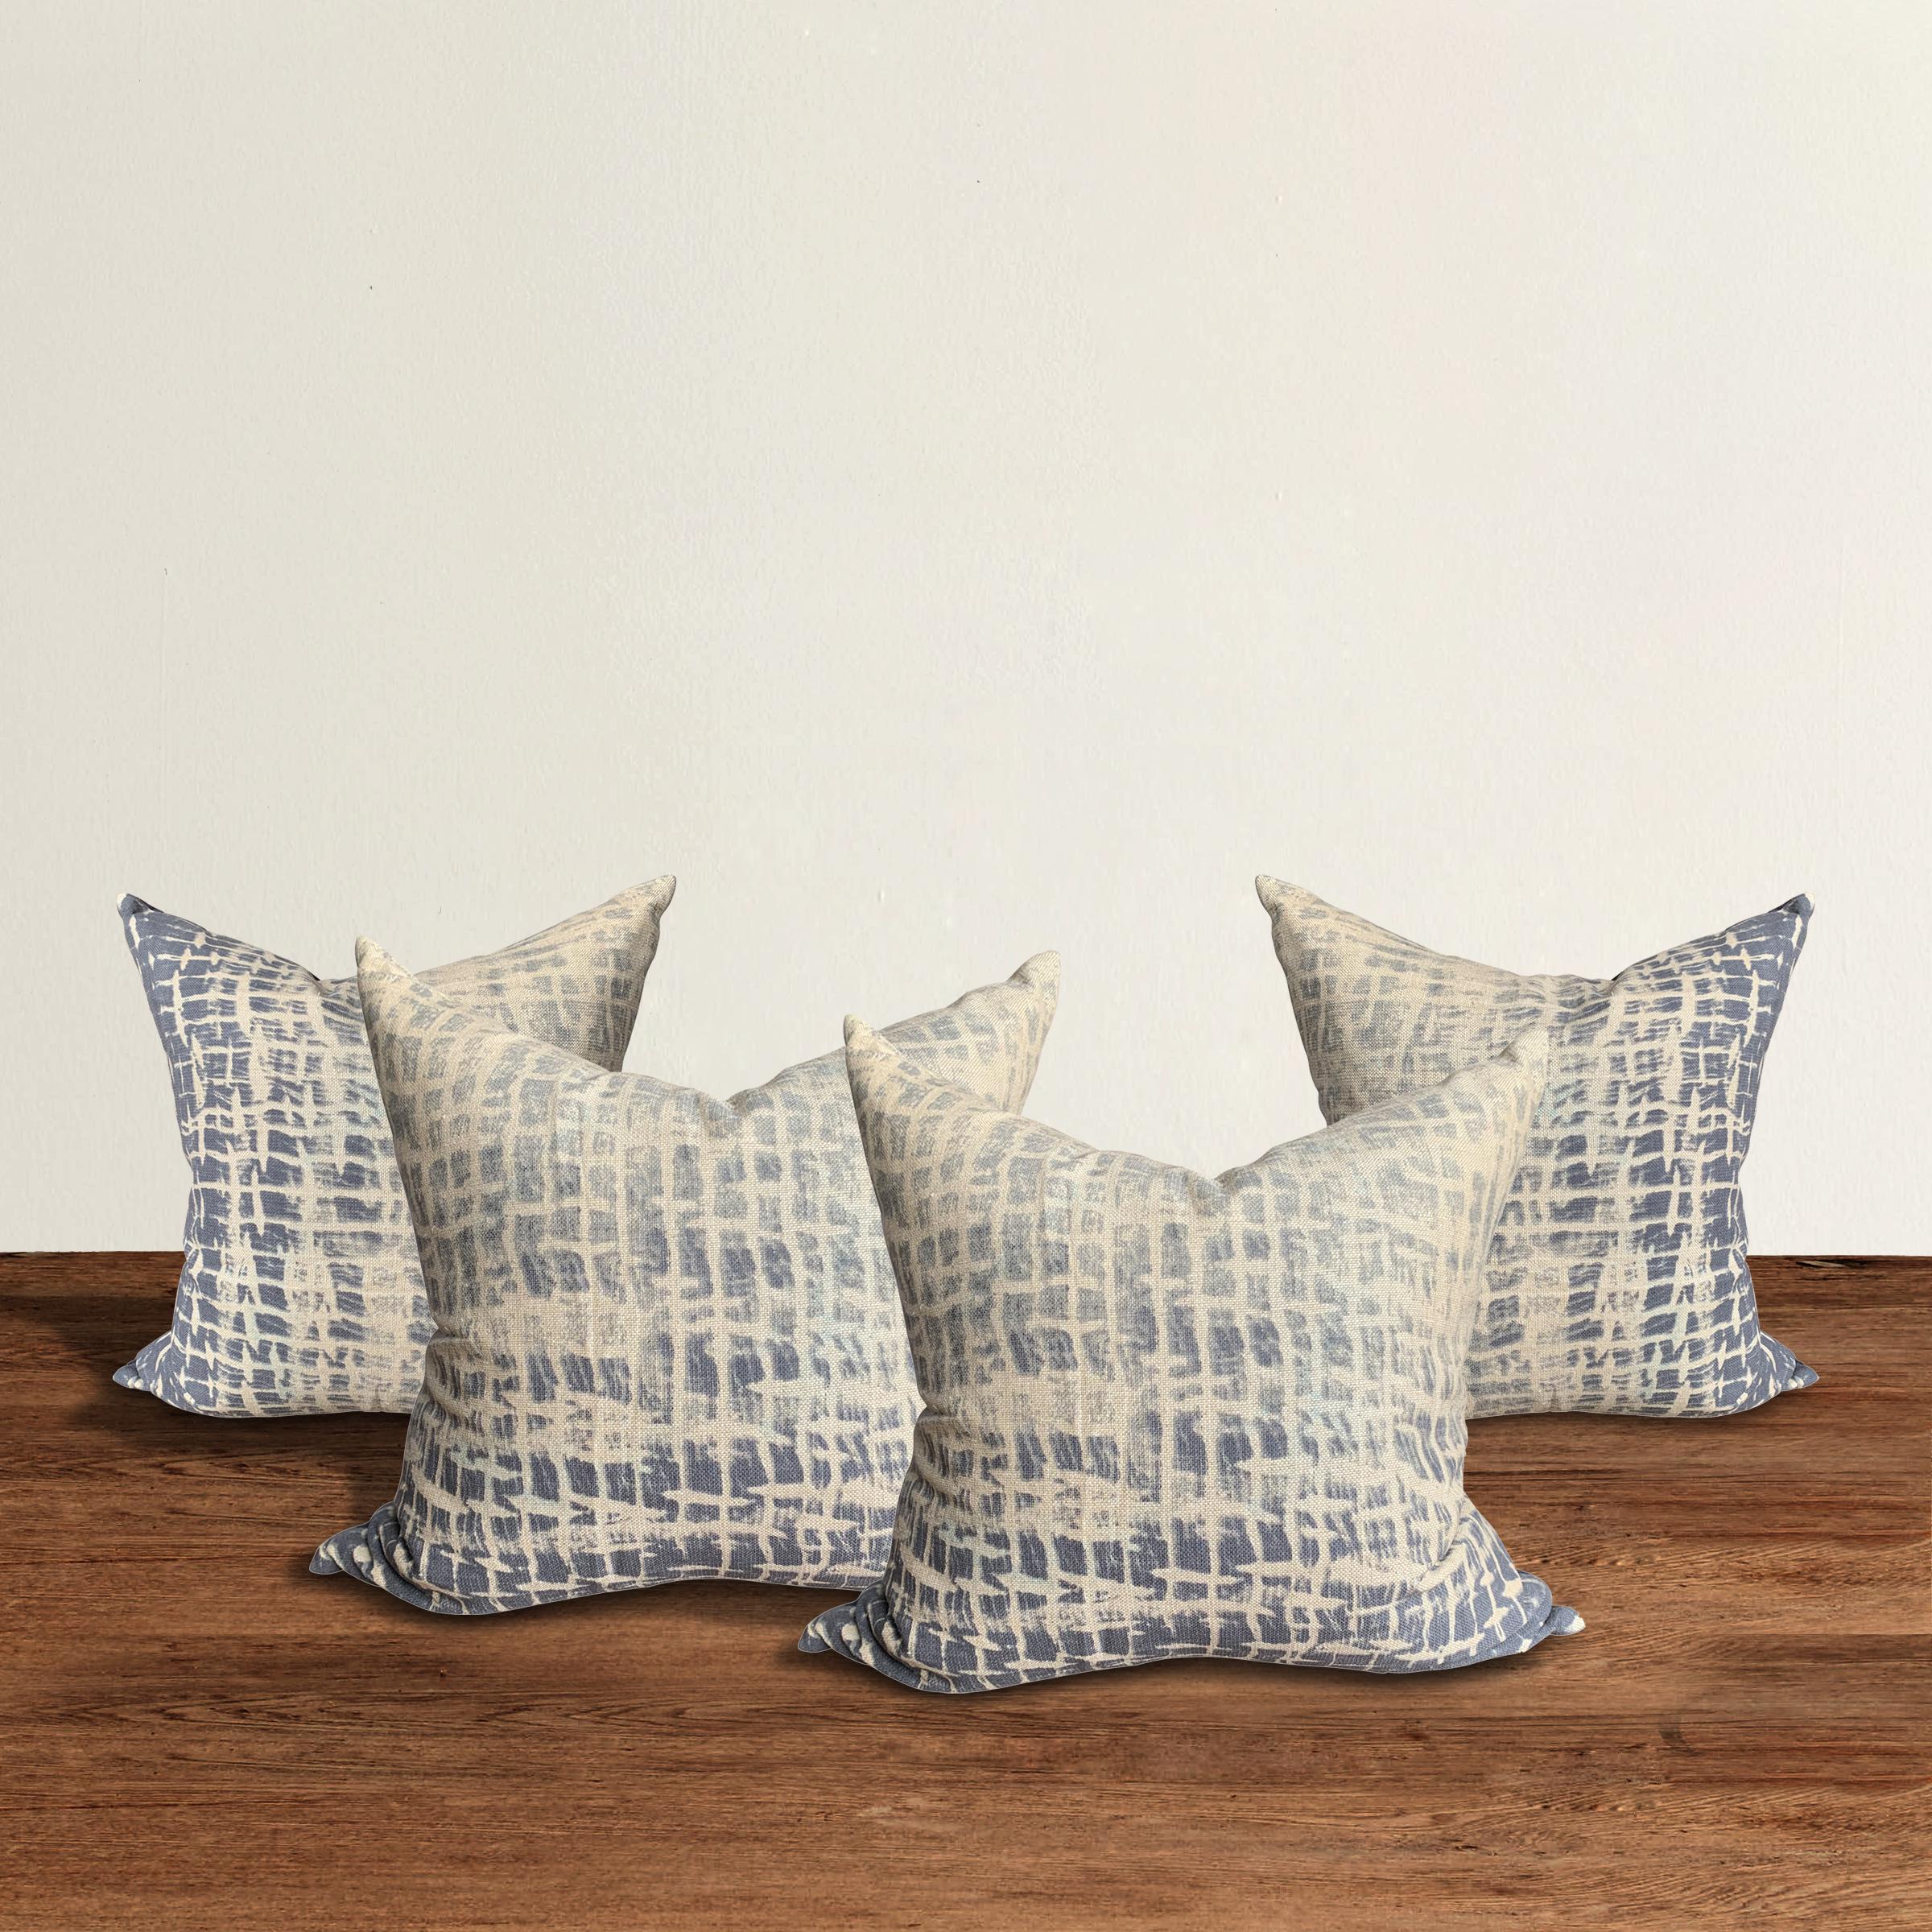 A chic set of four raw silk pillows with an indigo ombre silk screen printed pattern across the faces, and solid indigo silk backings, with mother of pearl buttons and down inserts.